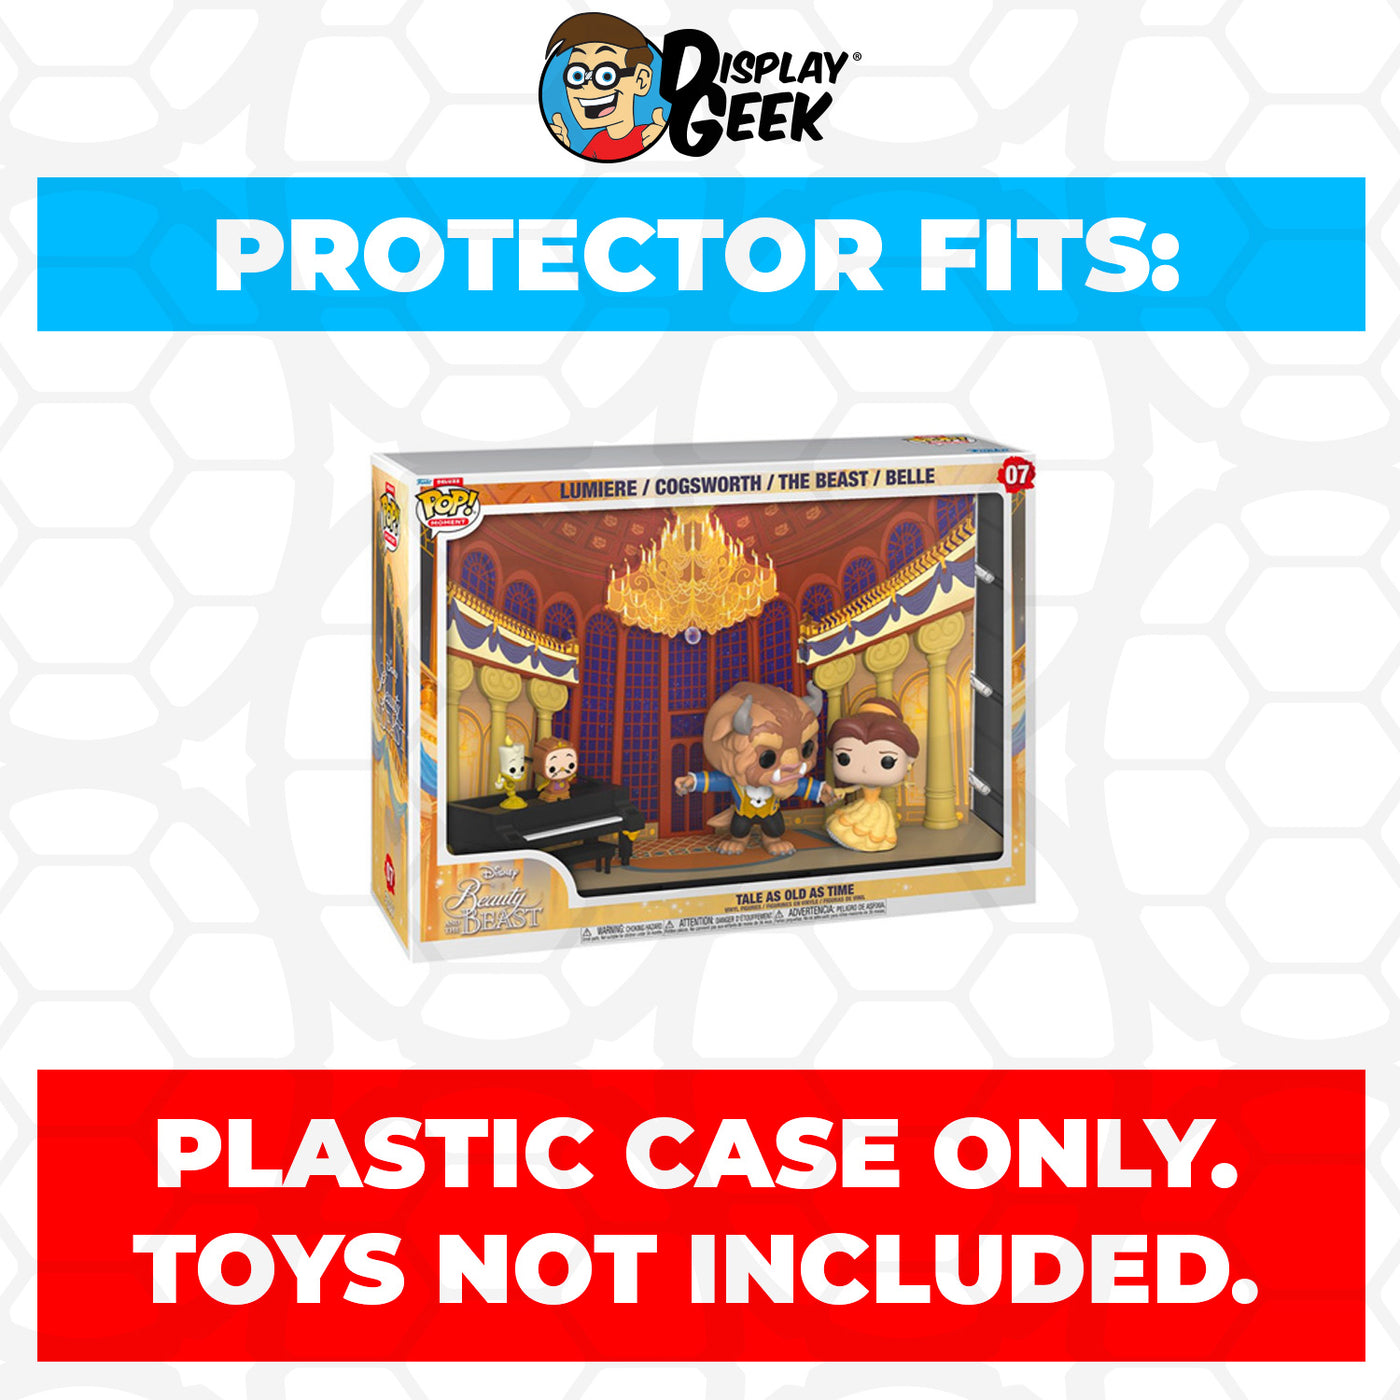 Pop Protector for Beauty and the Beast Tale as Old as Time #07 Funko Pop Moment Deluxe on The Protector Guide App by Display Geek